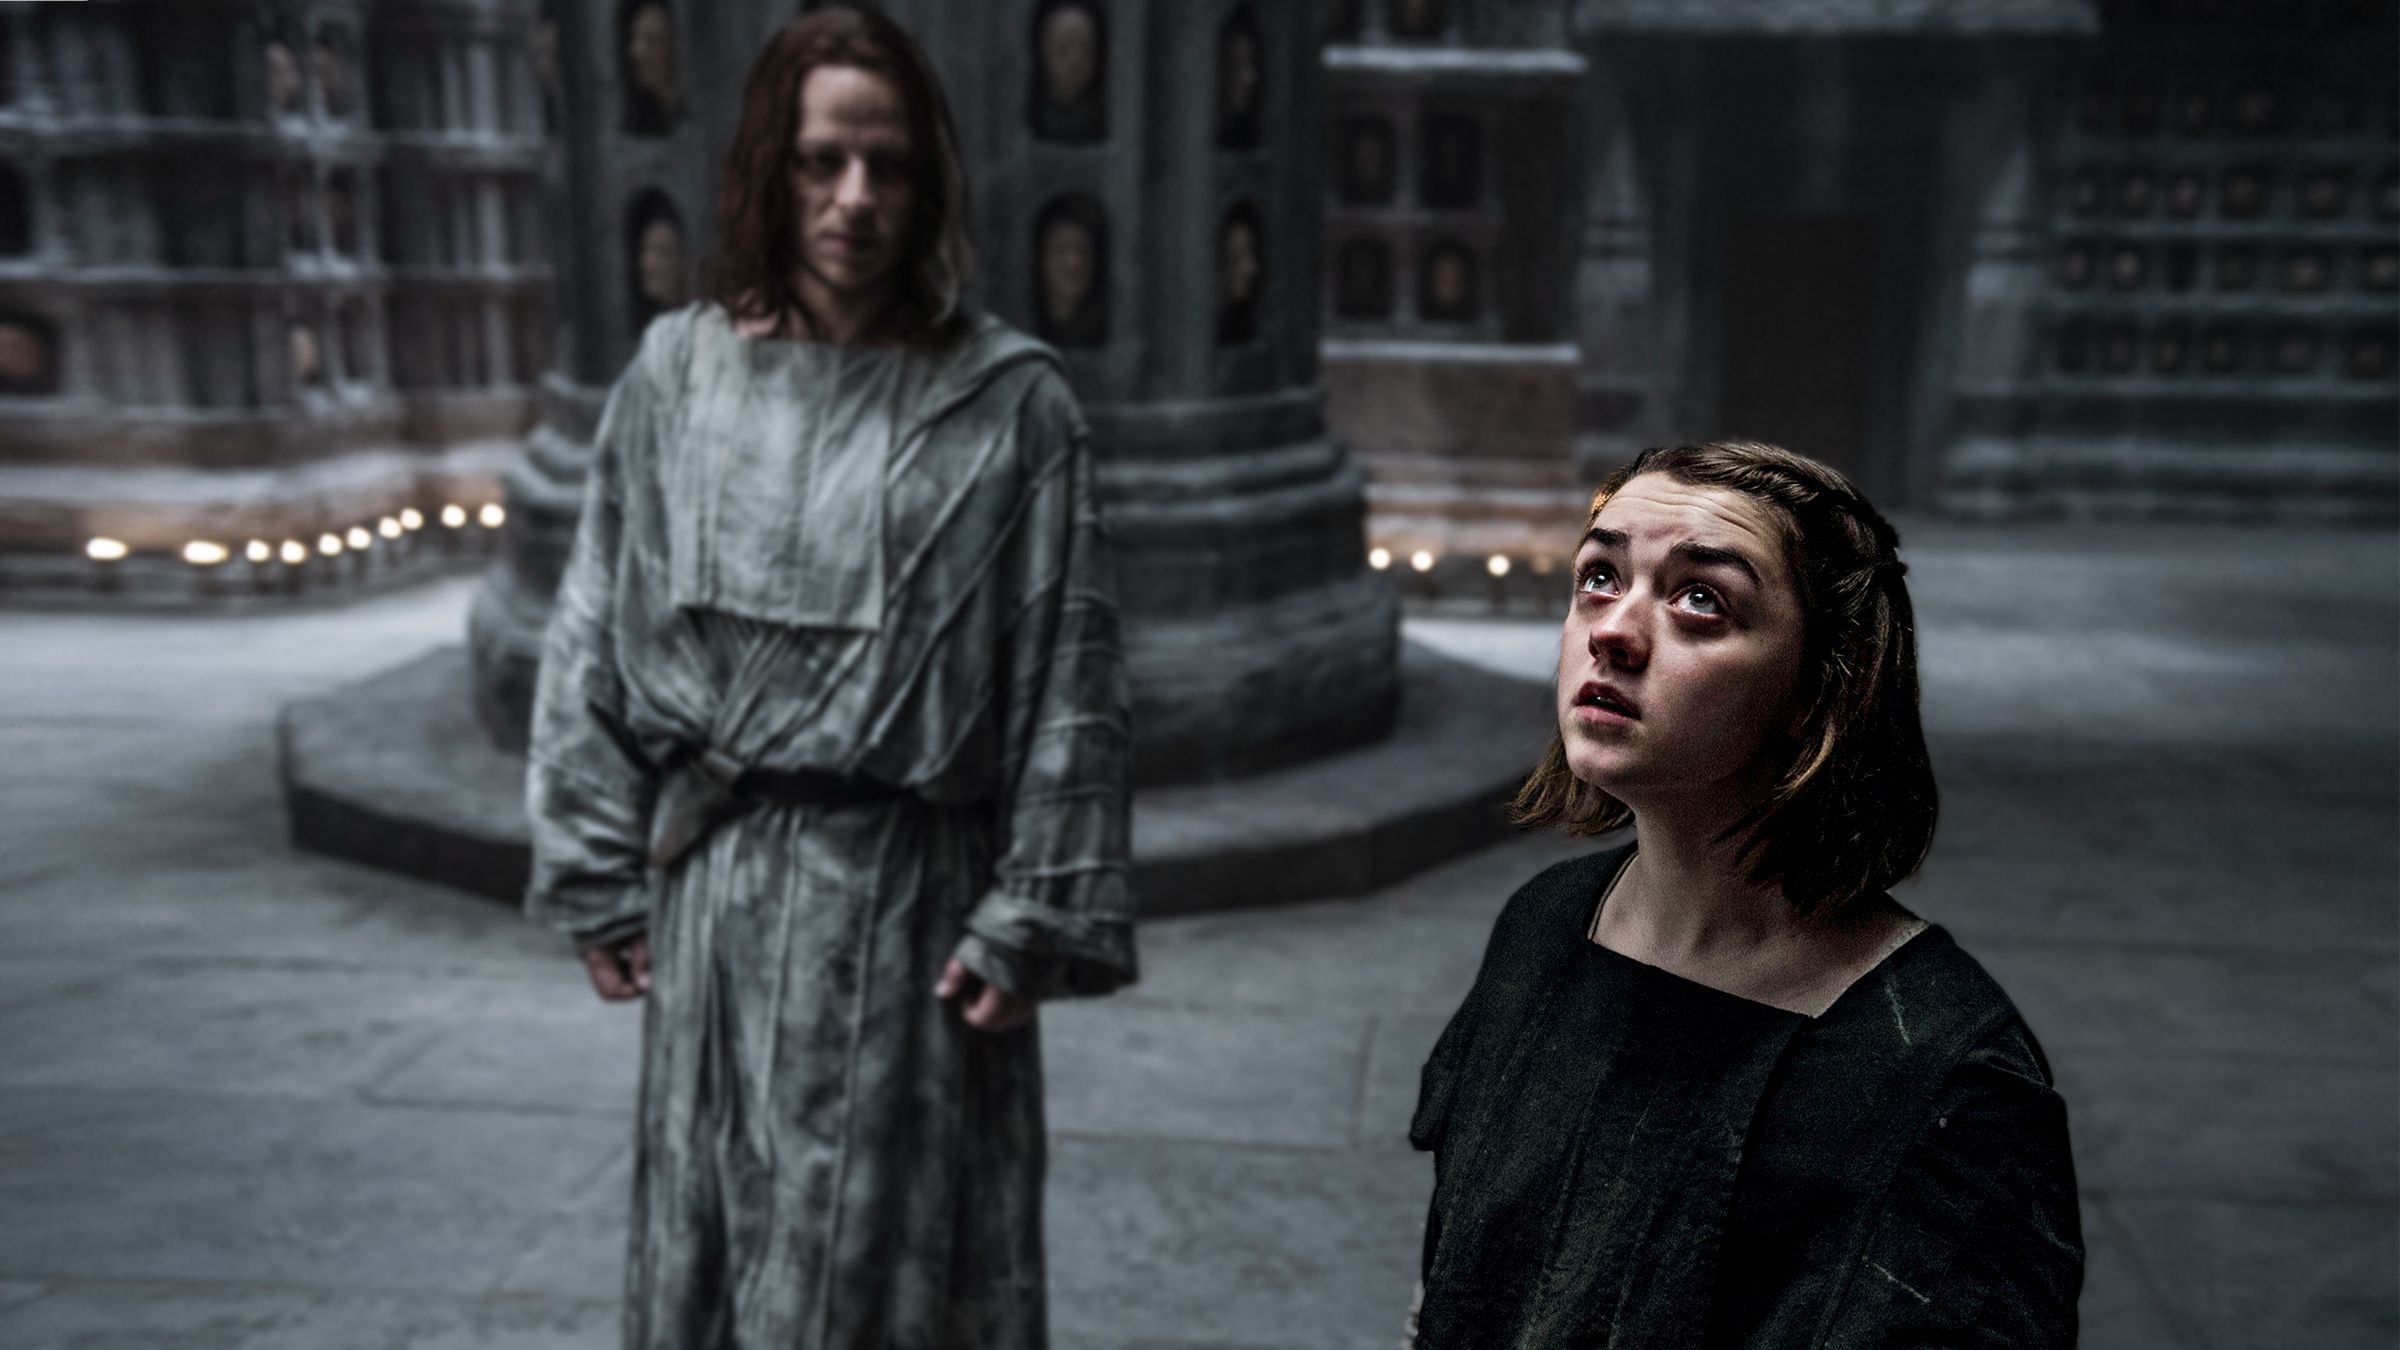 Arya and Jaqen